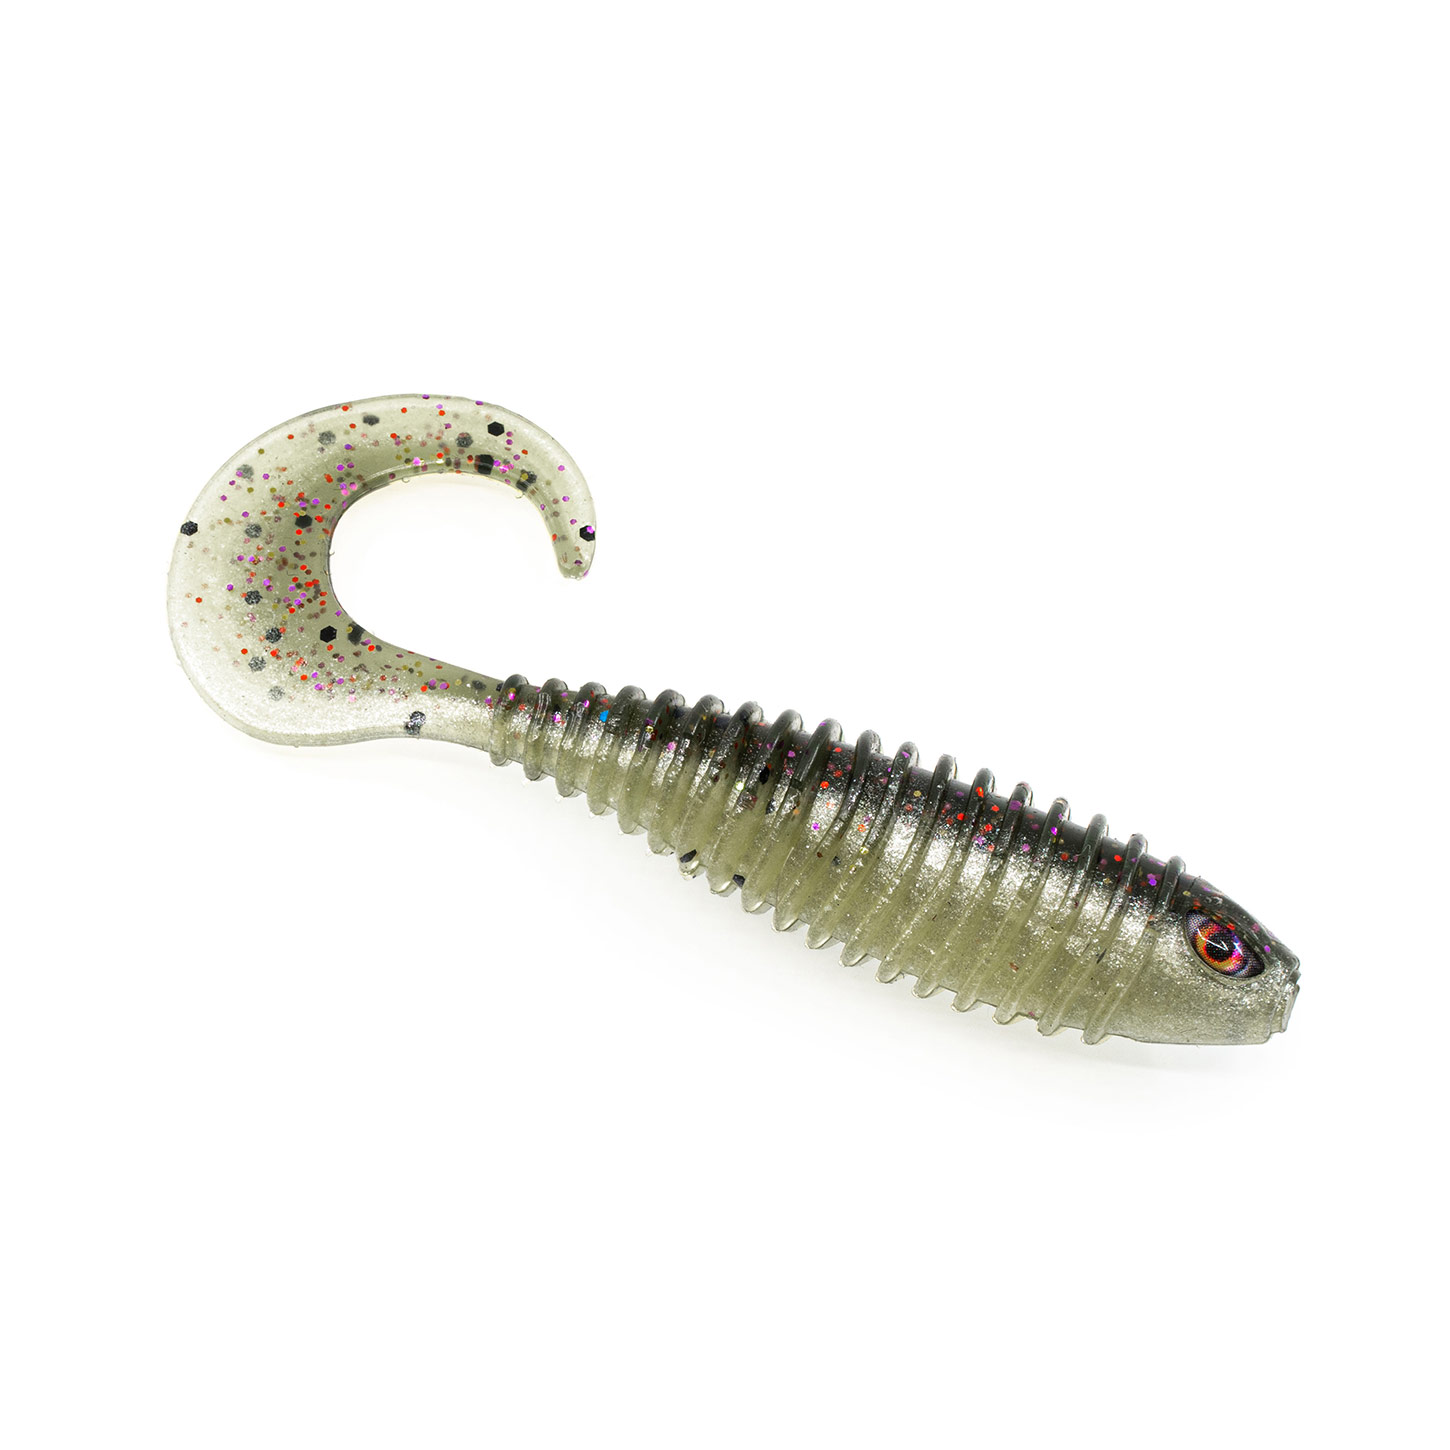 CURLY BAIT – River2sea Brands